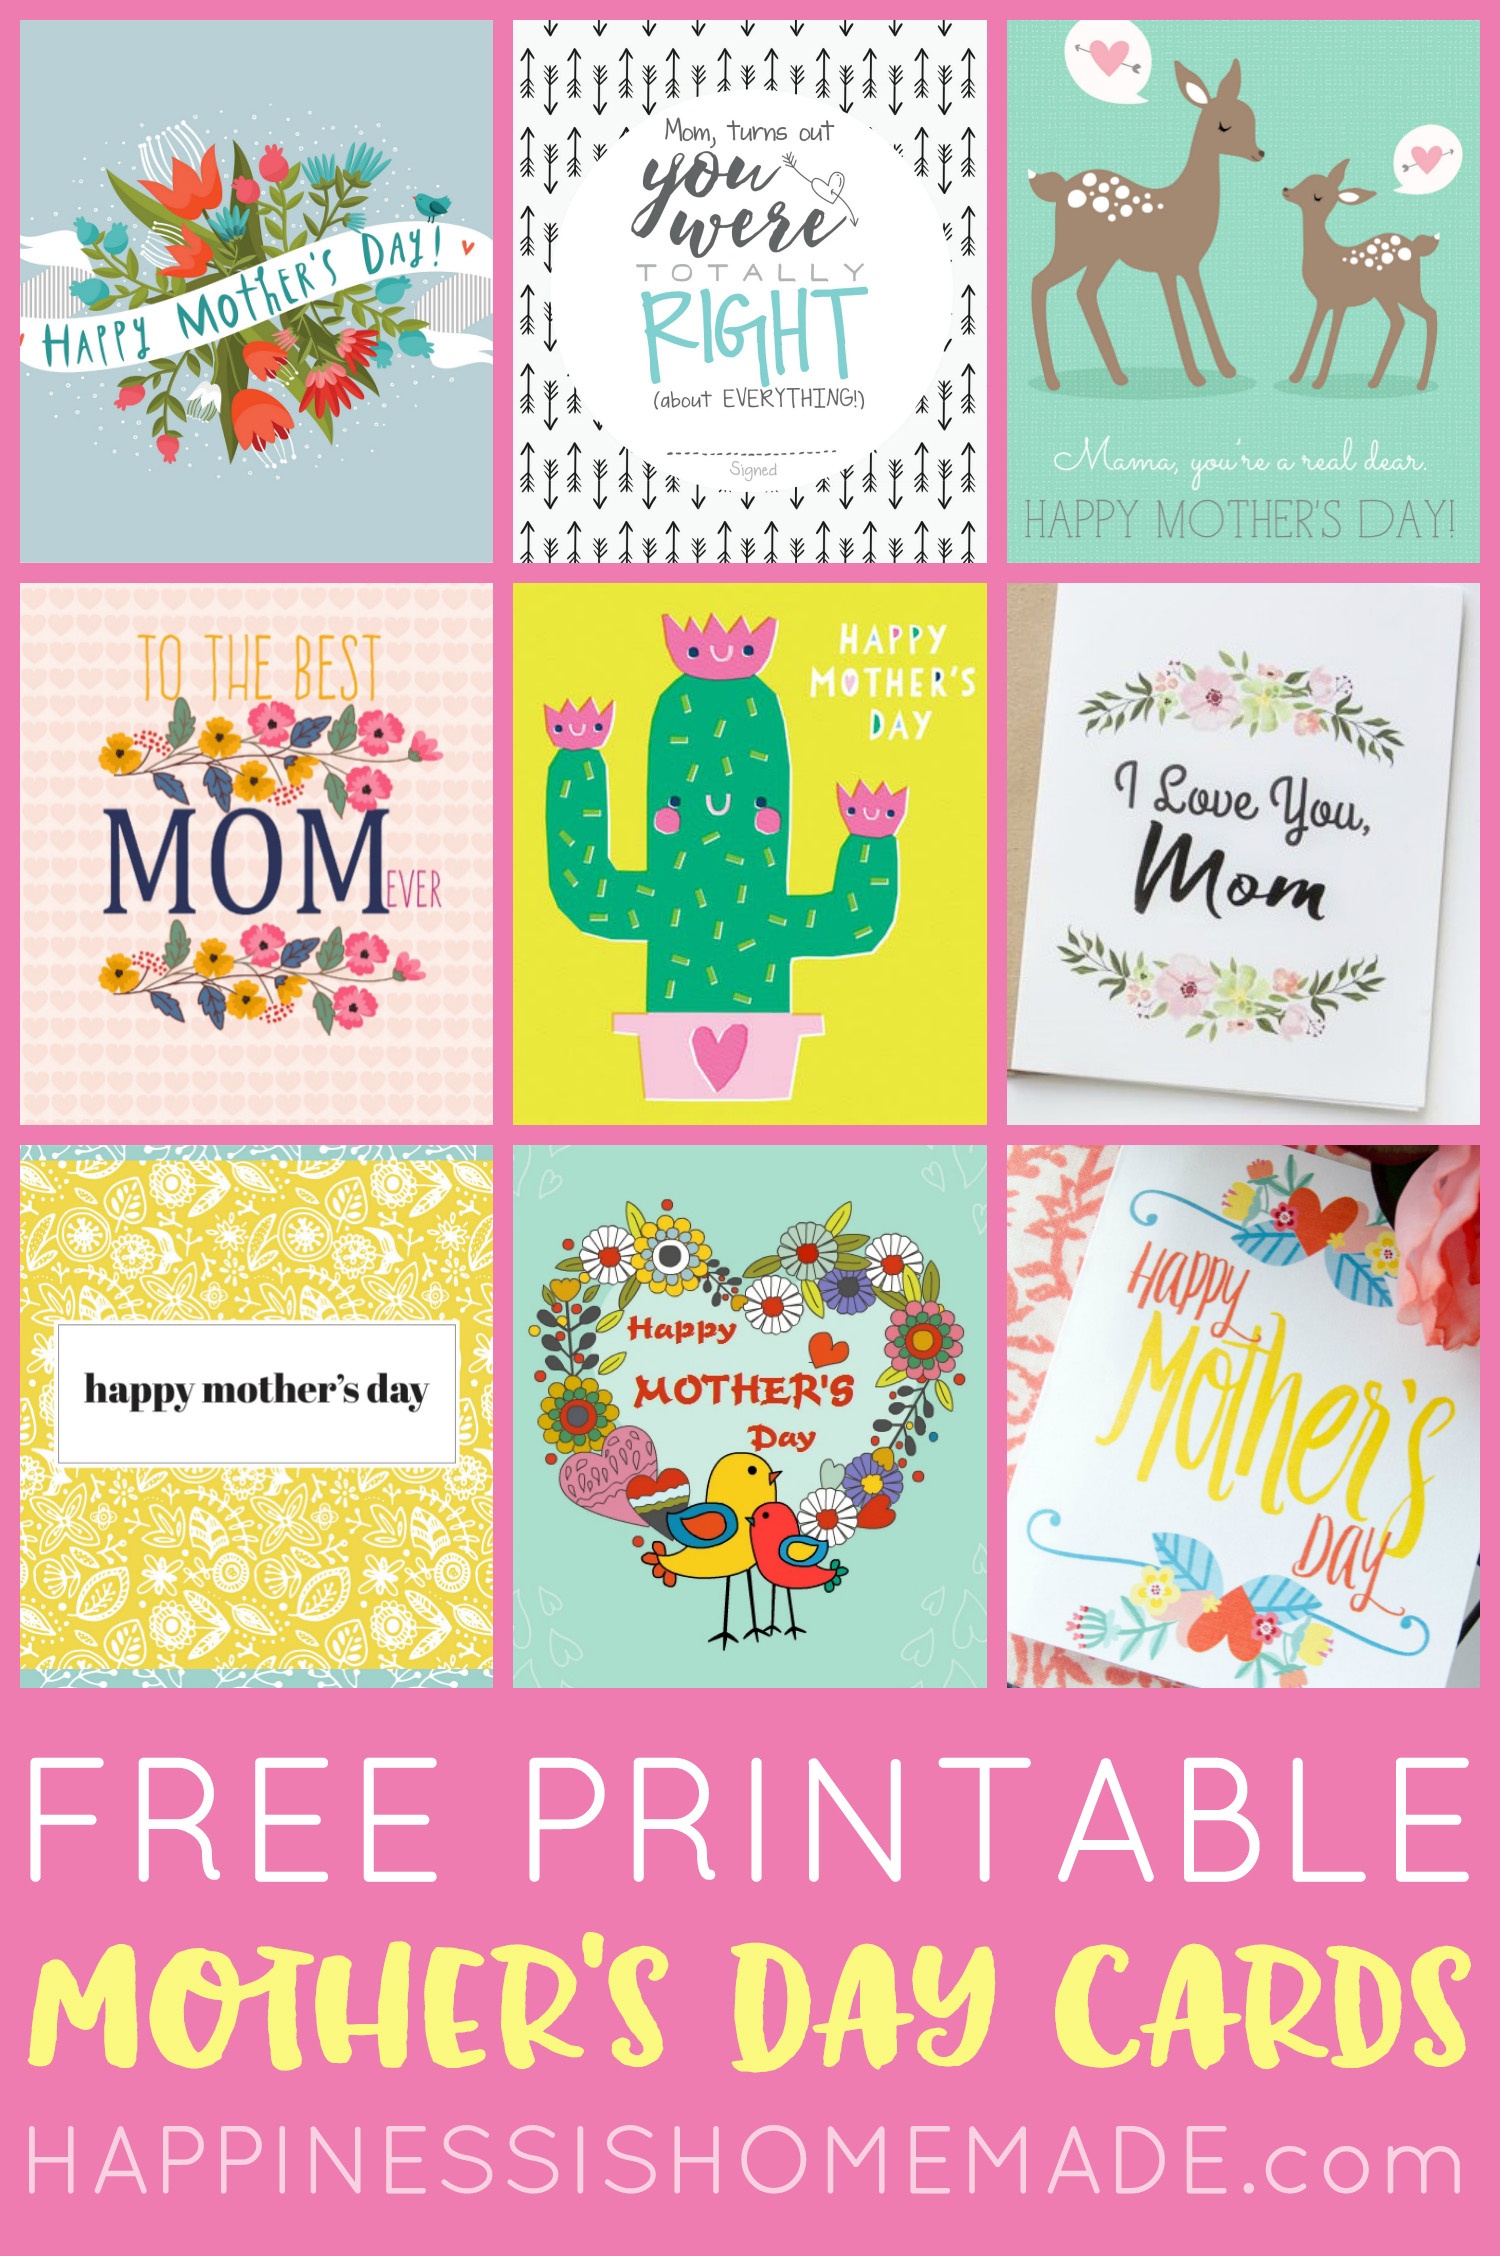 Free Printable Mother's Day Cards - Happiness Is Homemade - Free Printable Images